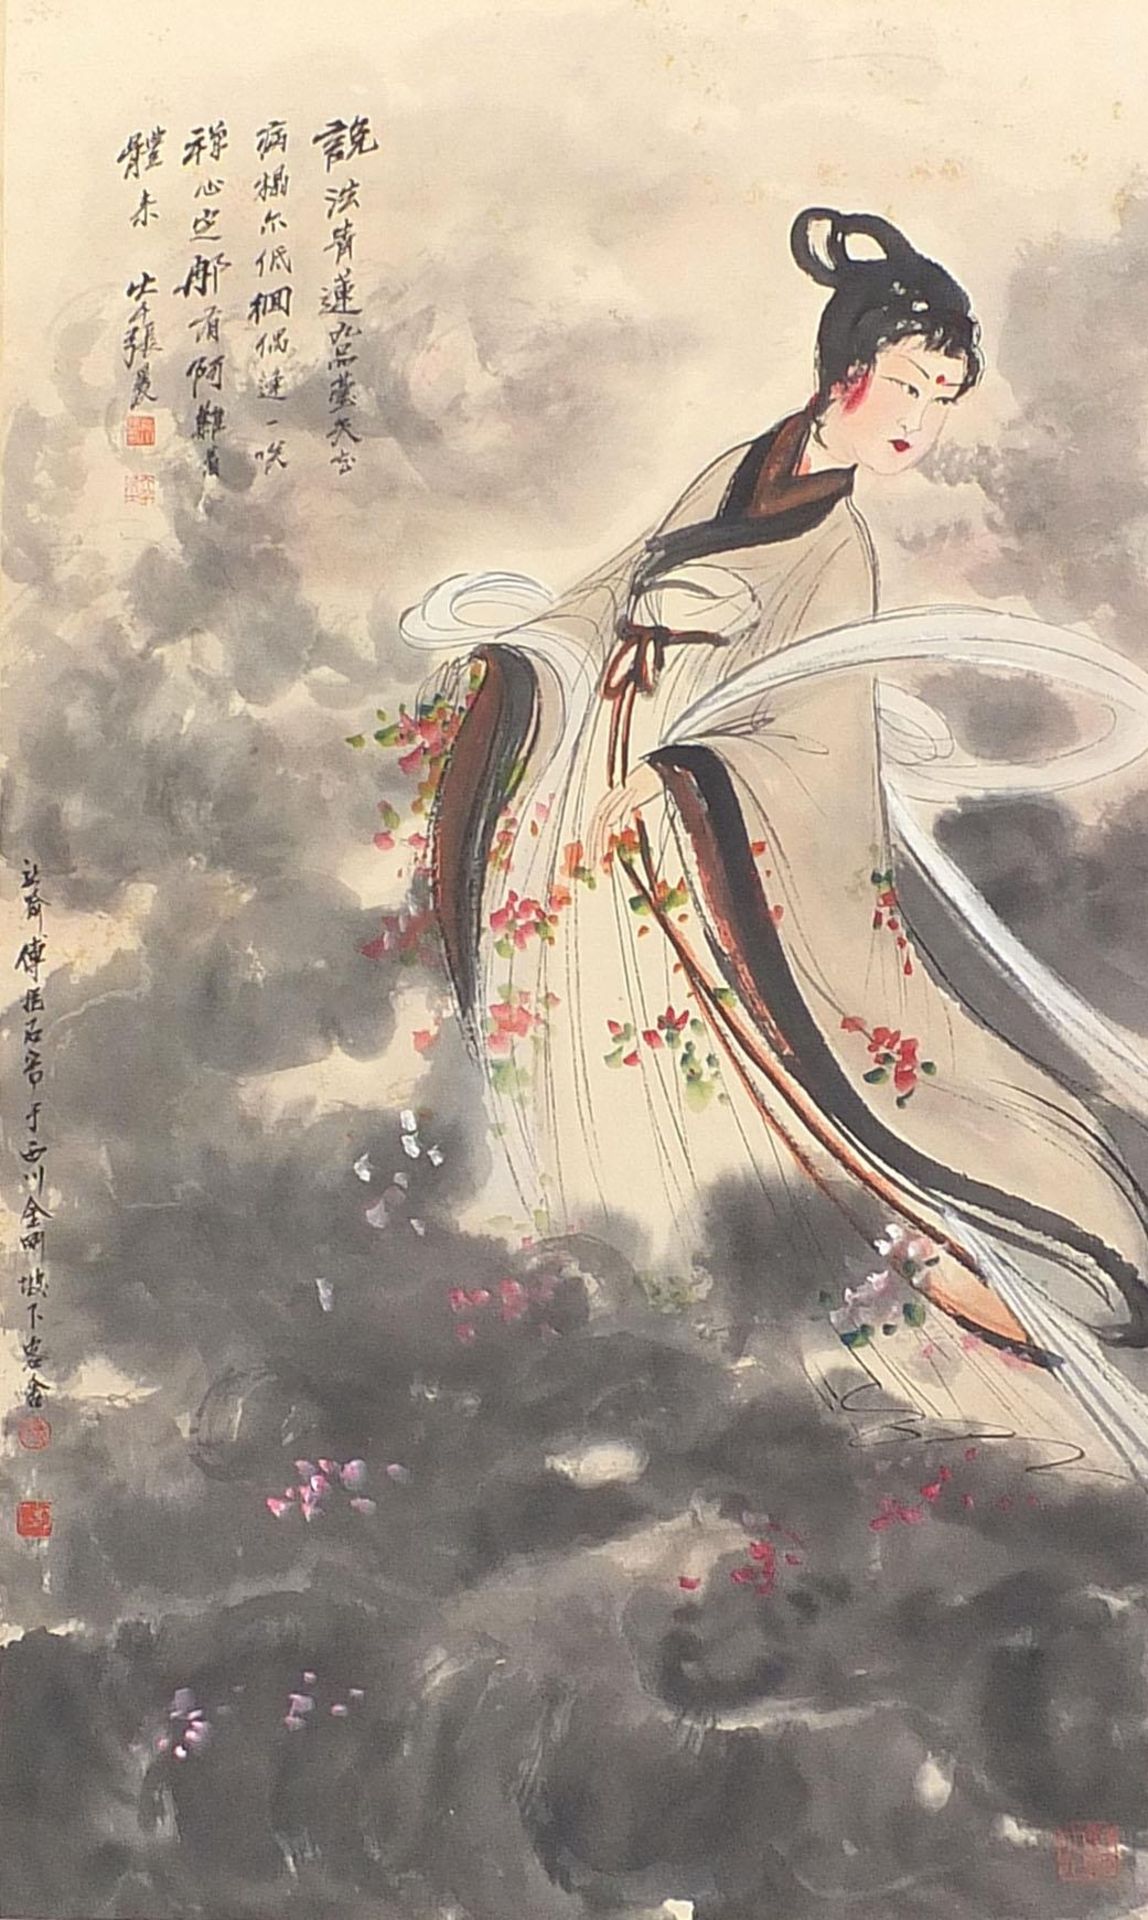 Attributed to Fu Baoshi - Female celestial spreading auspiciousness with inscribed poem attributed